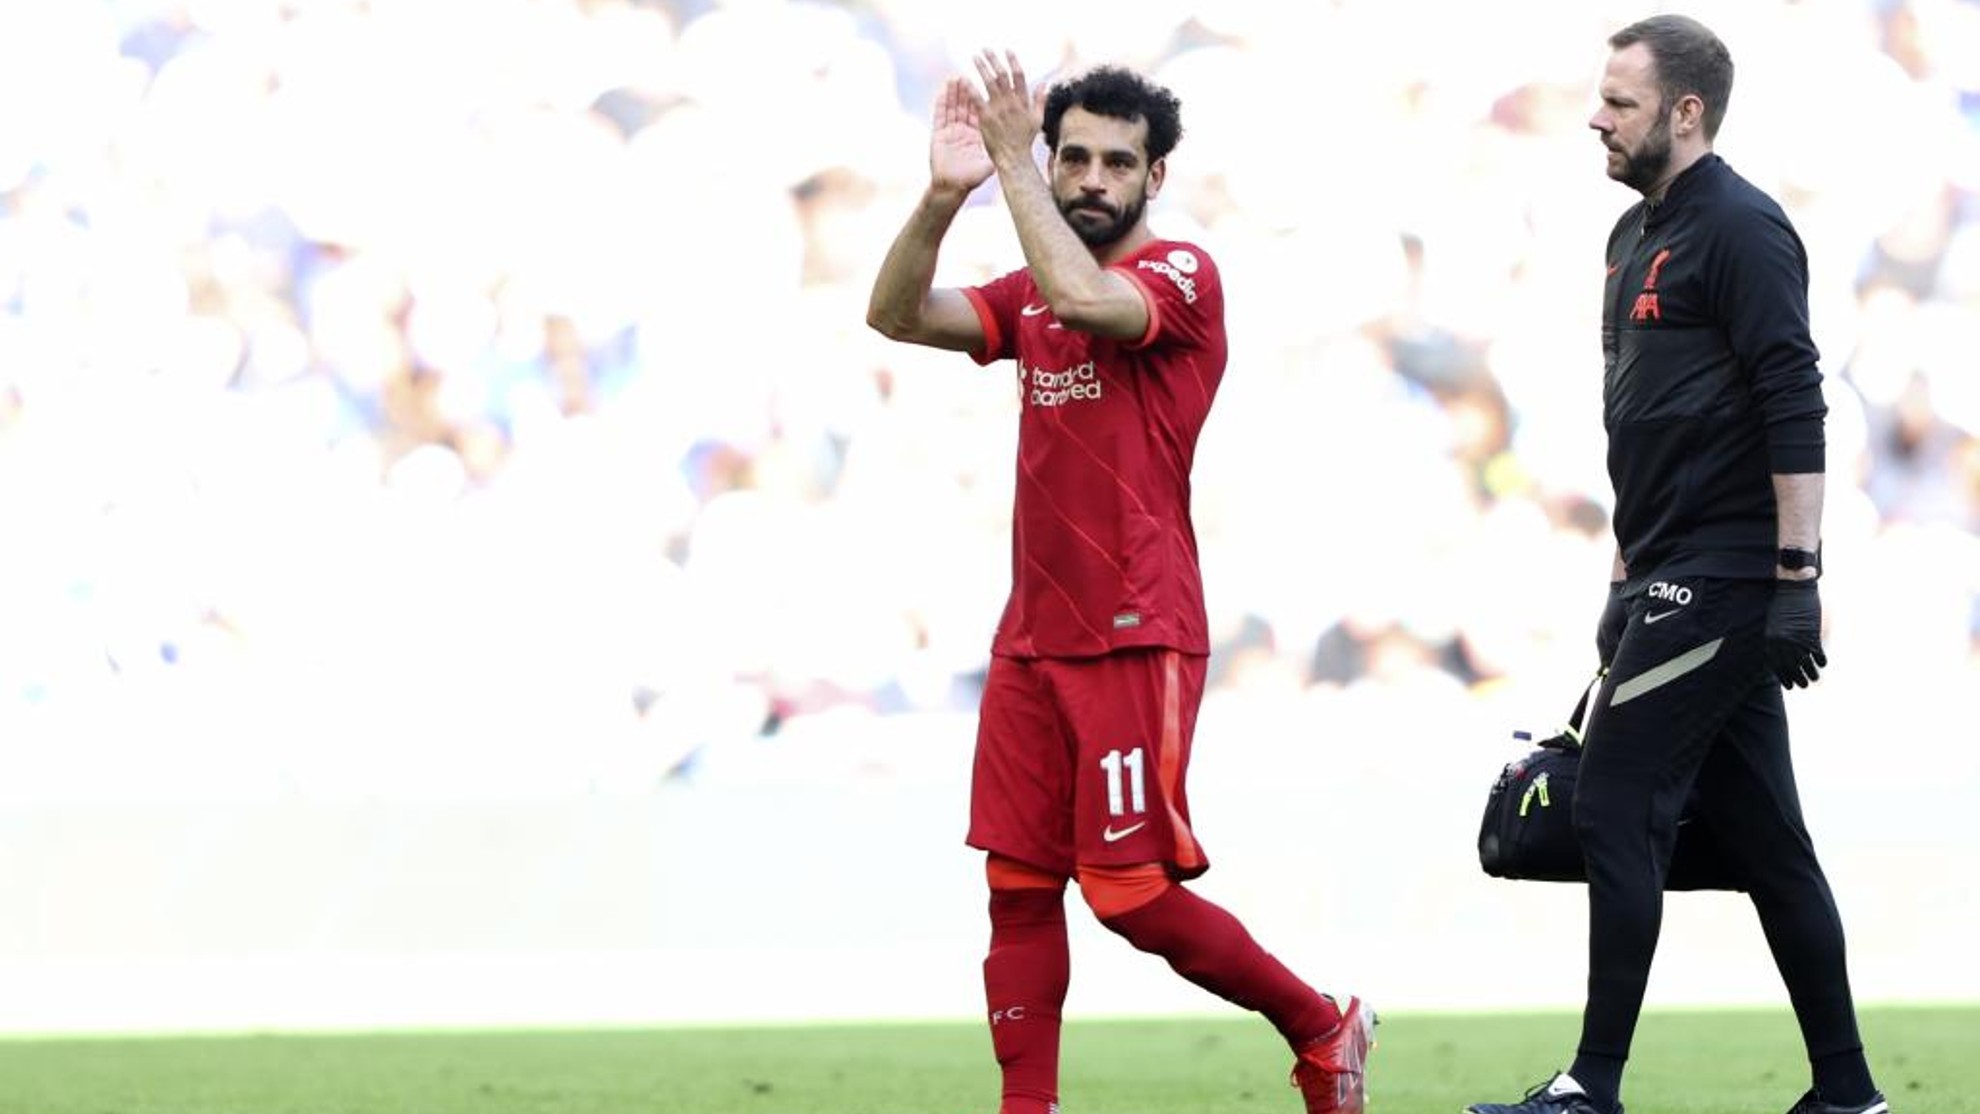 Mohamed Salah could not play the rest of the FA Cup